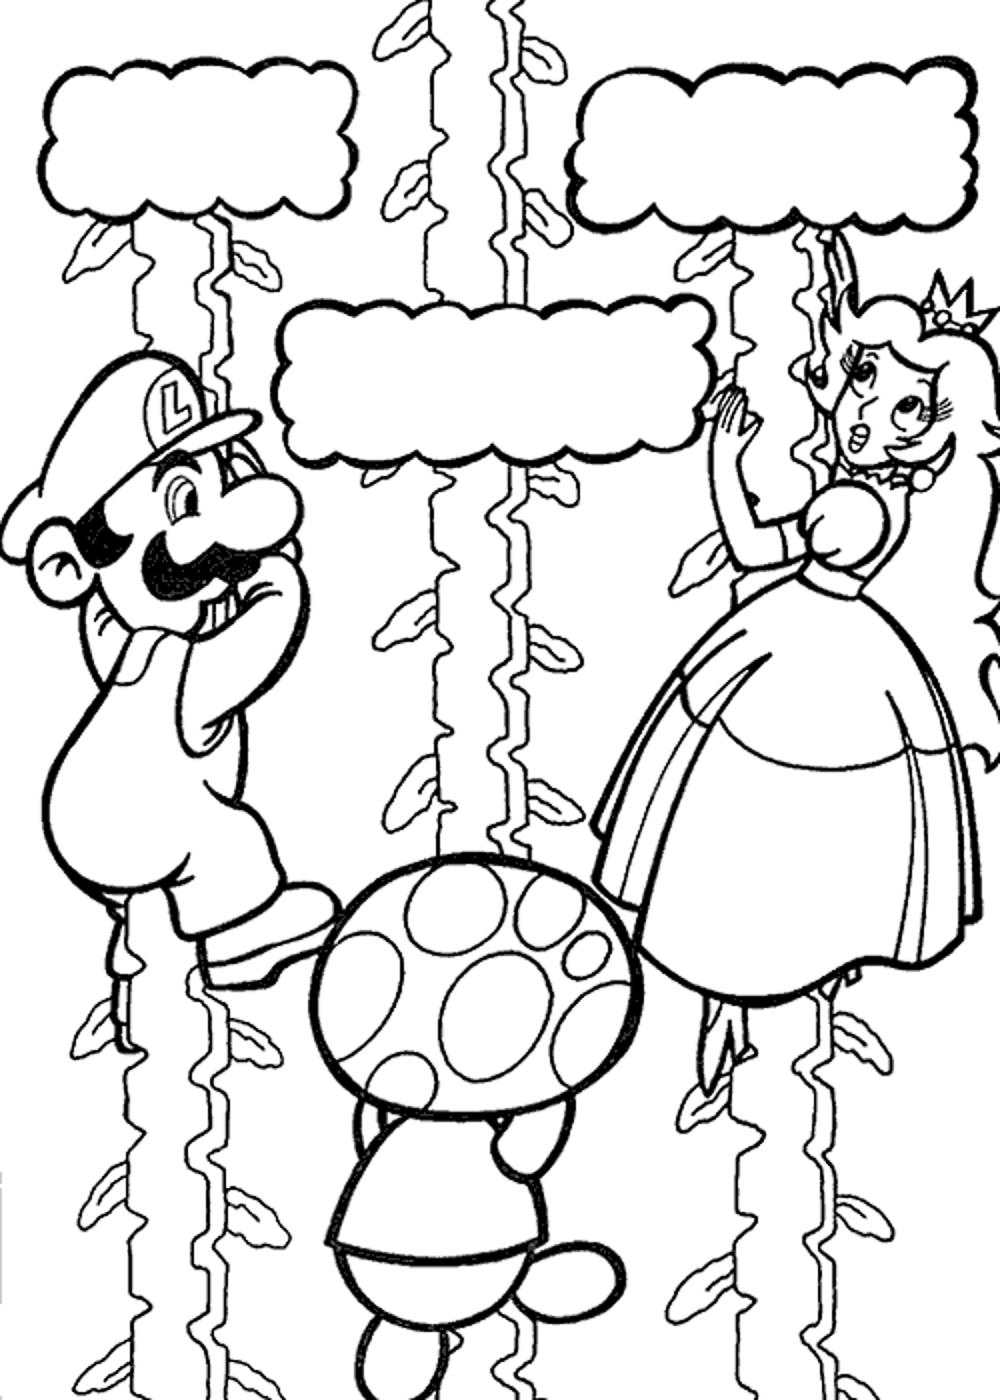 20 free super mario coloring pages for kids